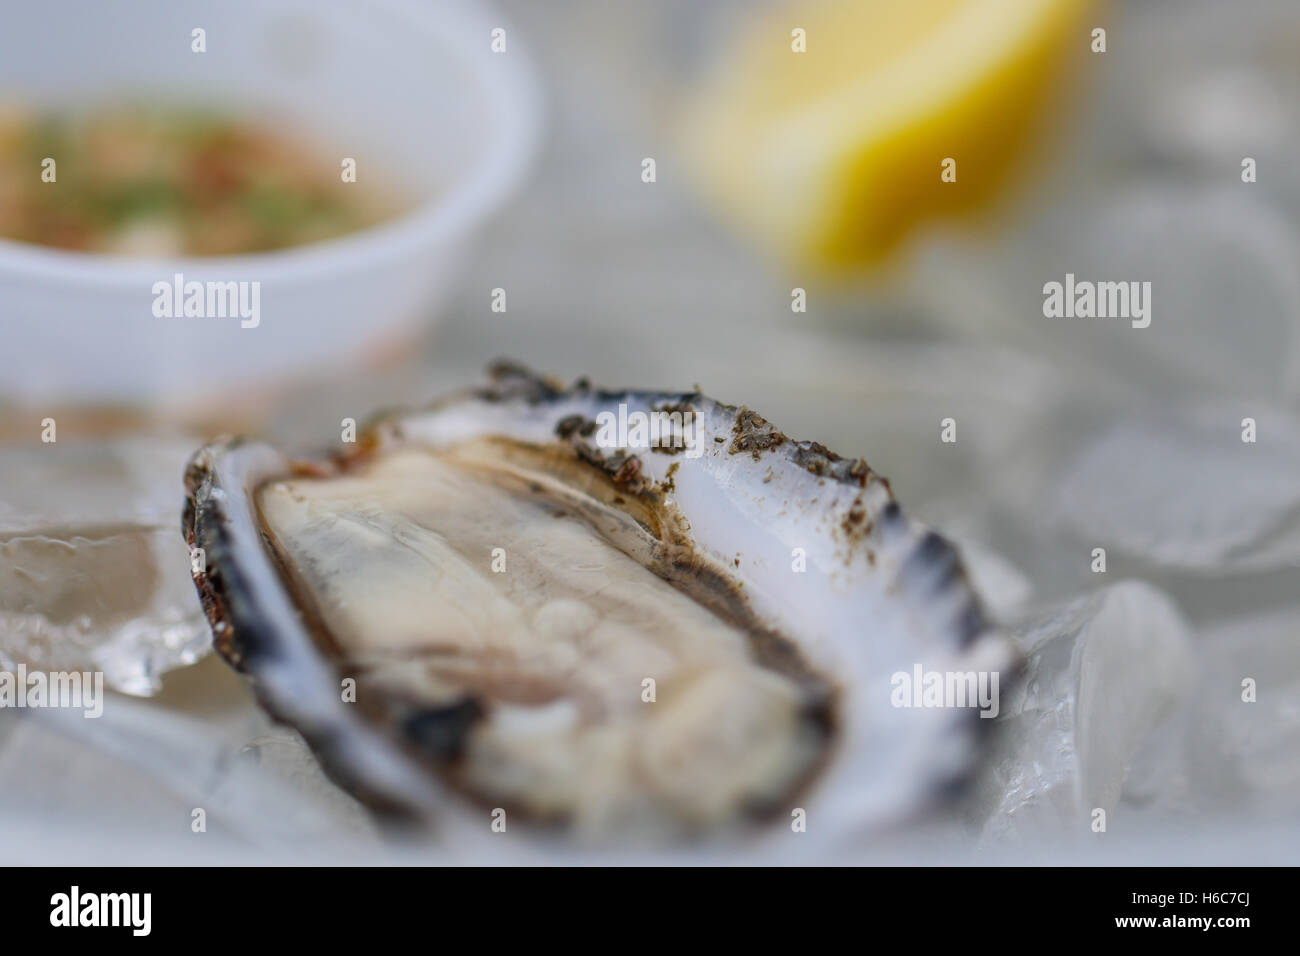 Oysters ready to eat. Stock Photo